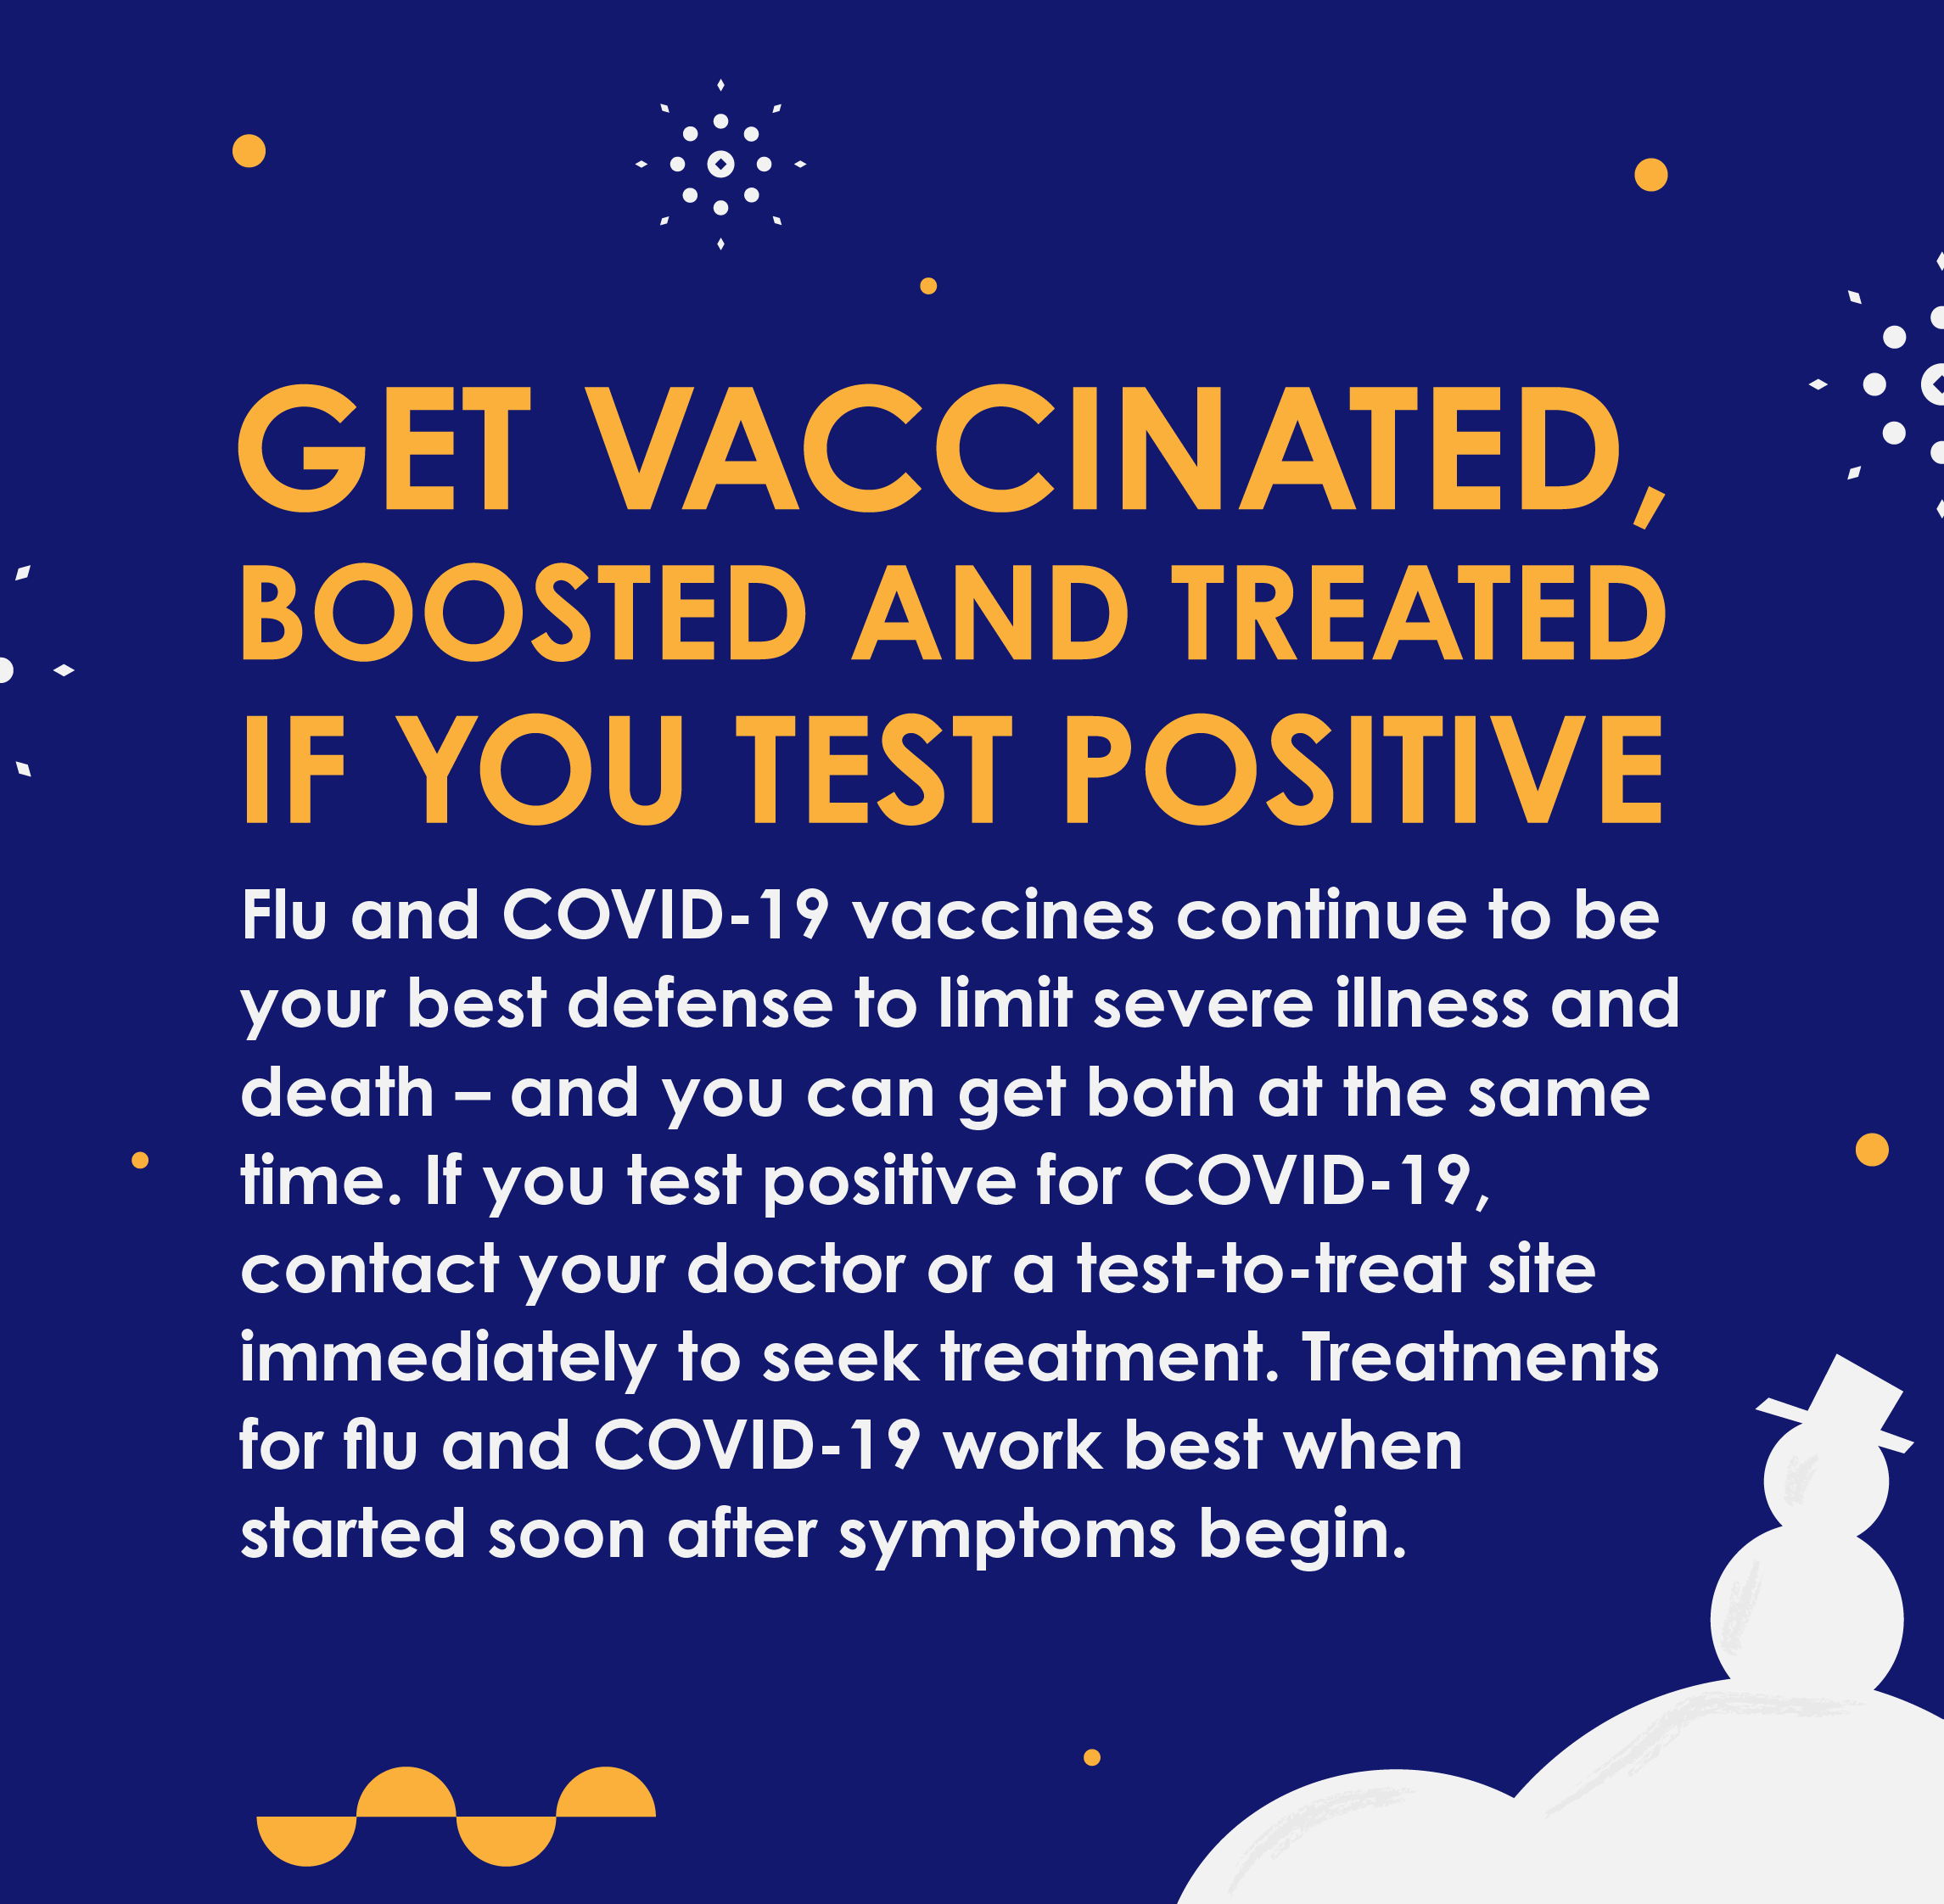 Get vaccinated, boosted and treted if you test positive